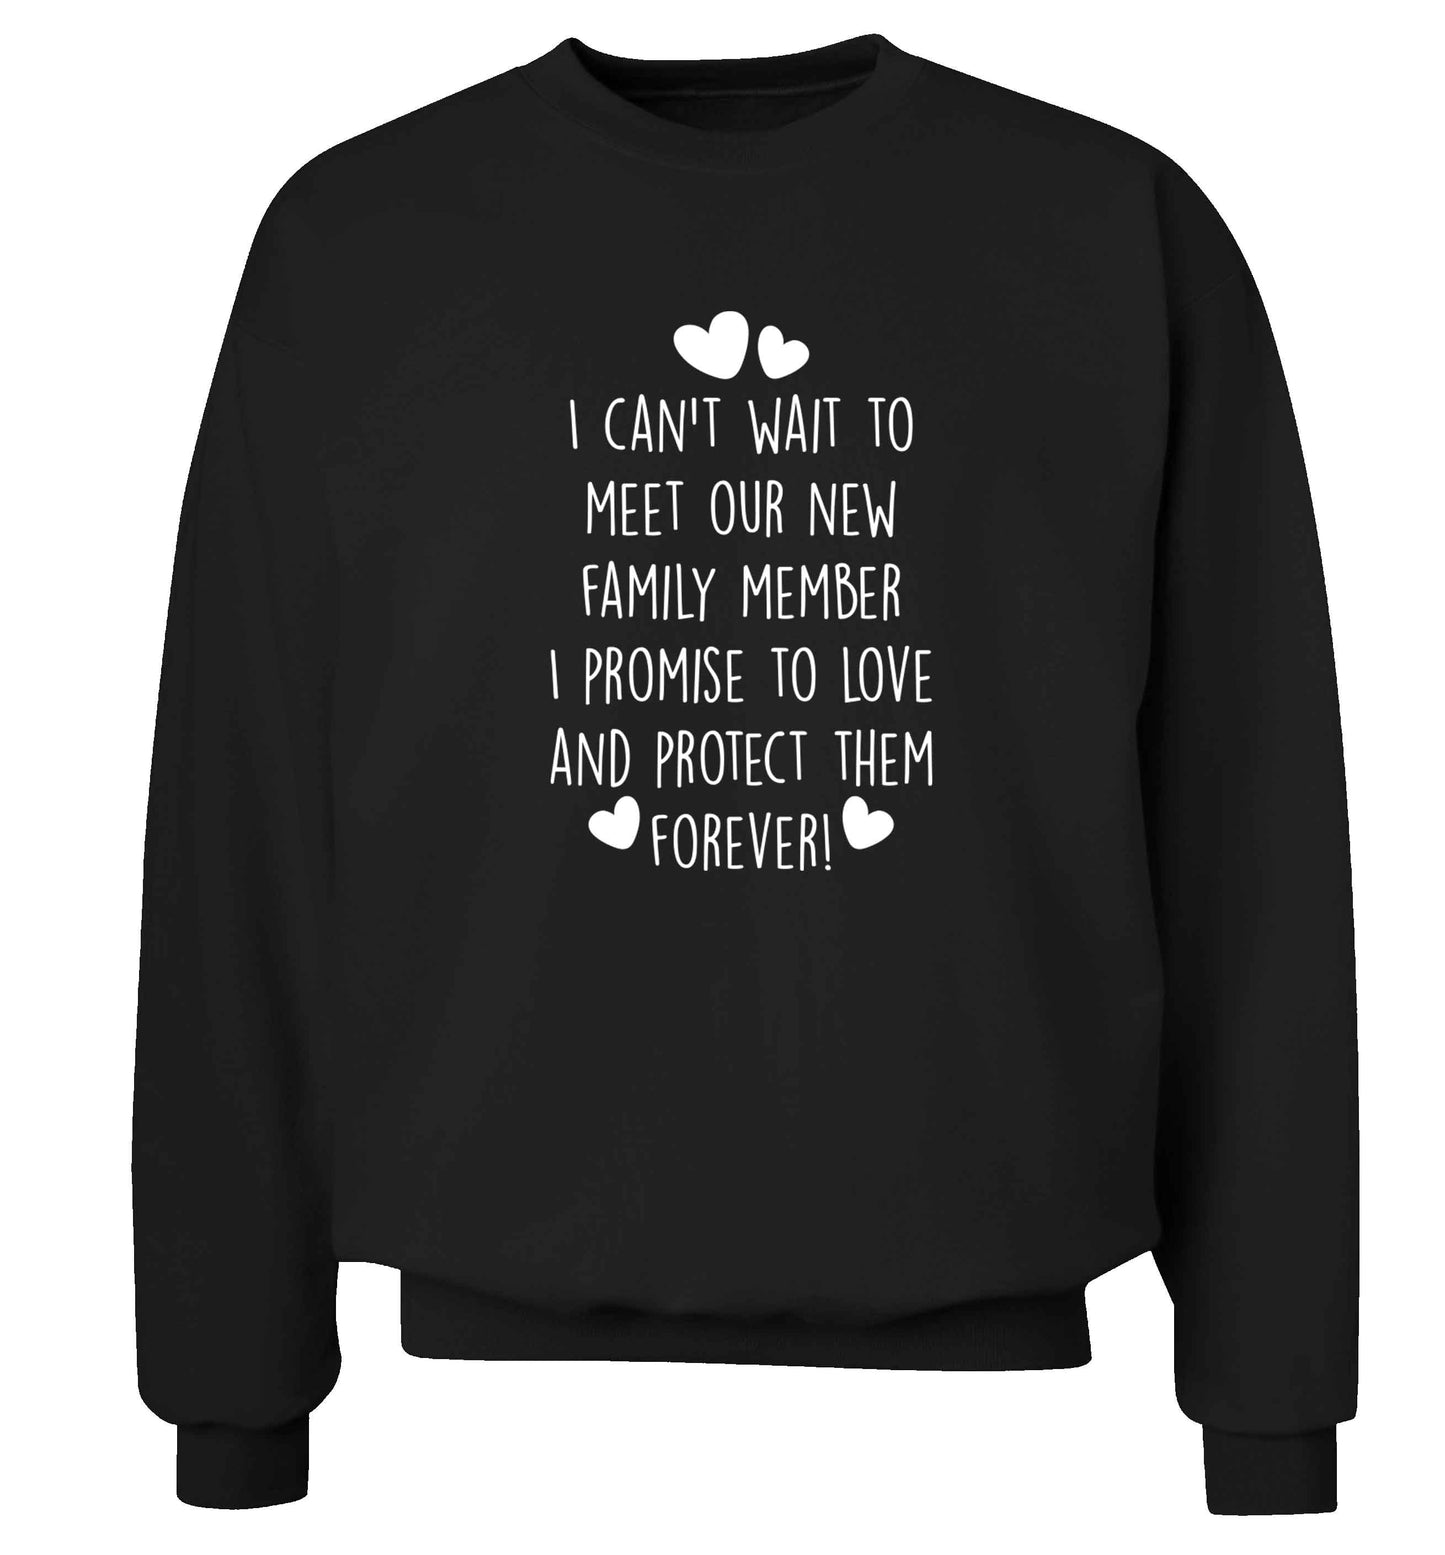 I can't wait to meet our new family member I promise to love and protect them foreverAdult's unisex black Sweater 2XL